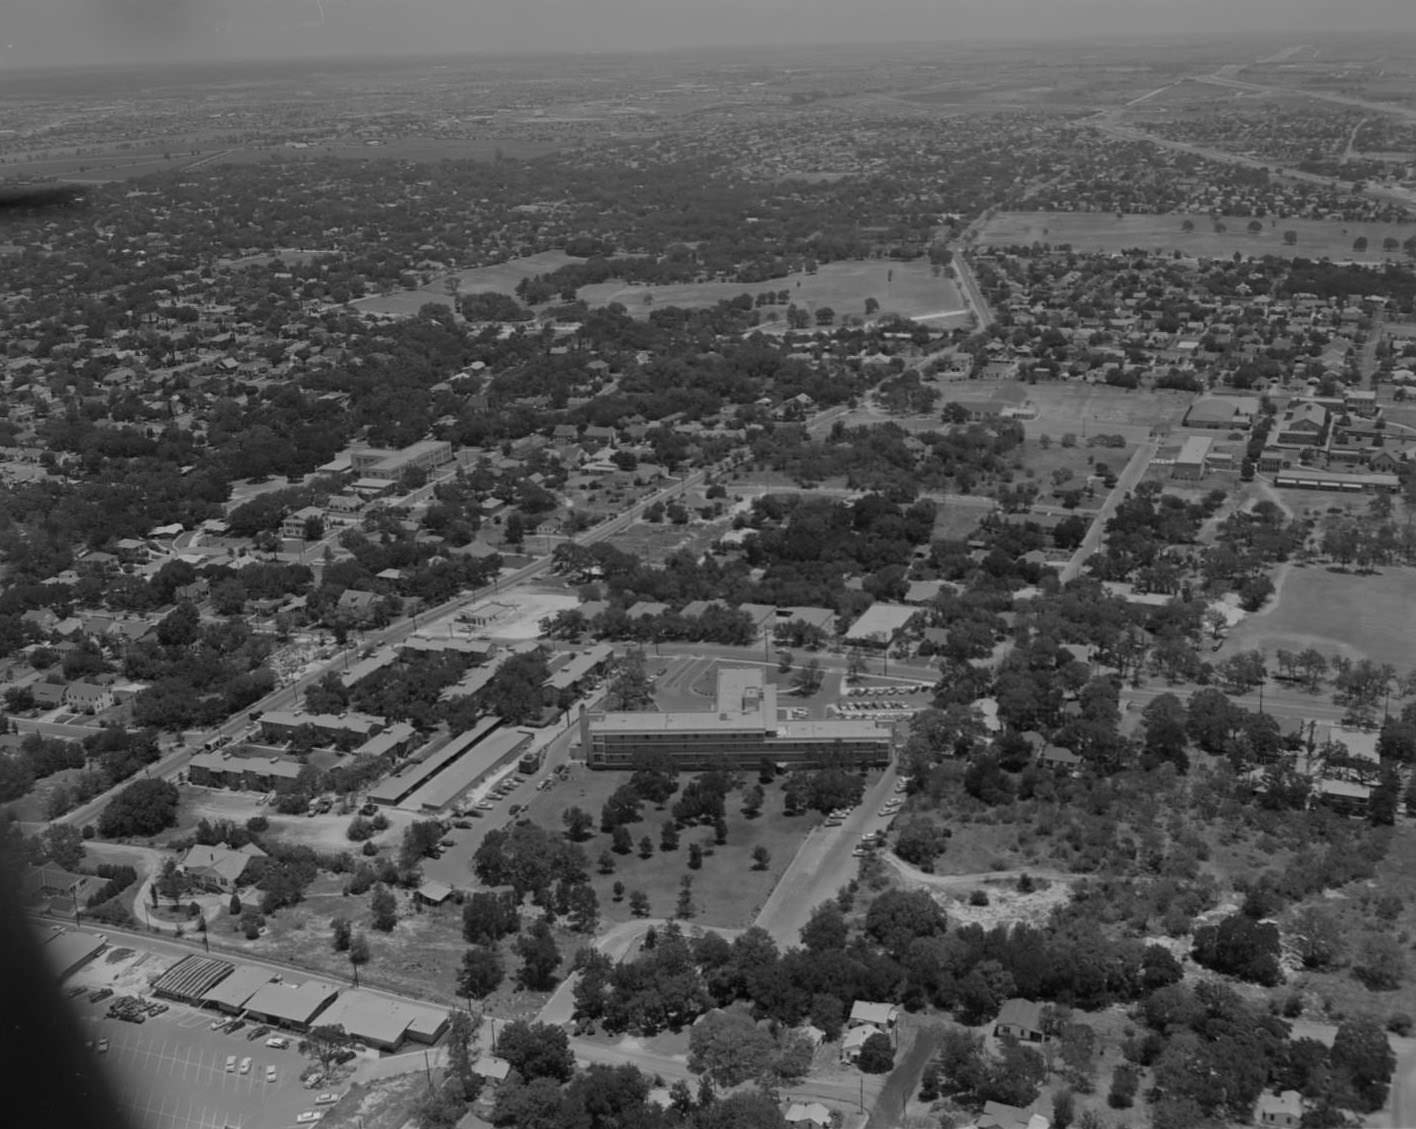 Aerial view of 919 E. 32nd St. - St. David's Hospital, 1956